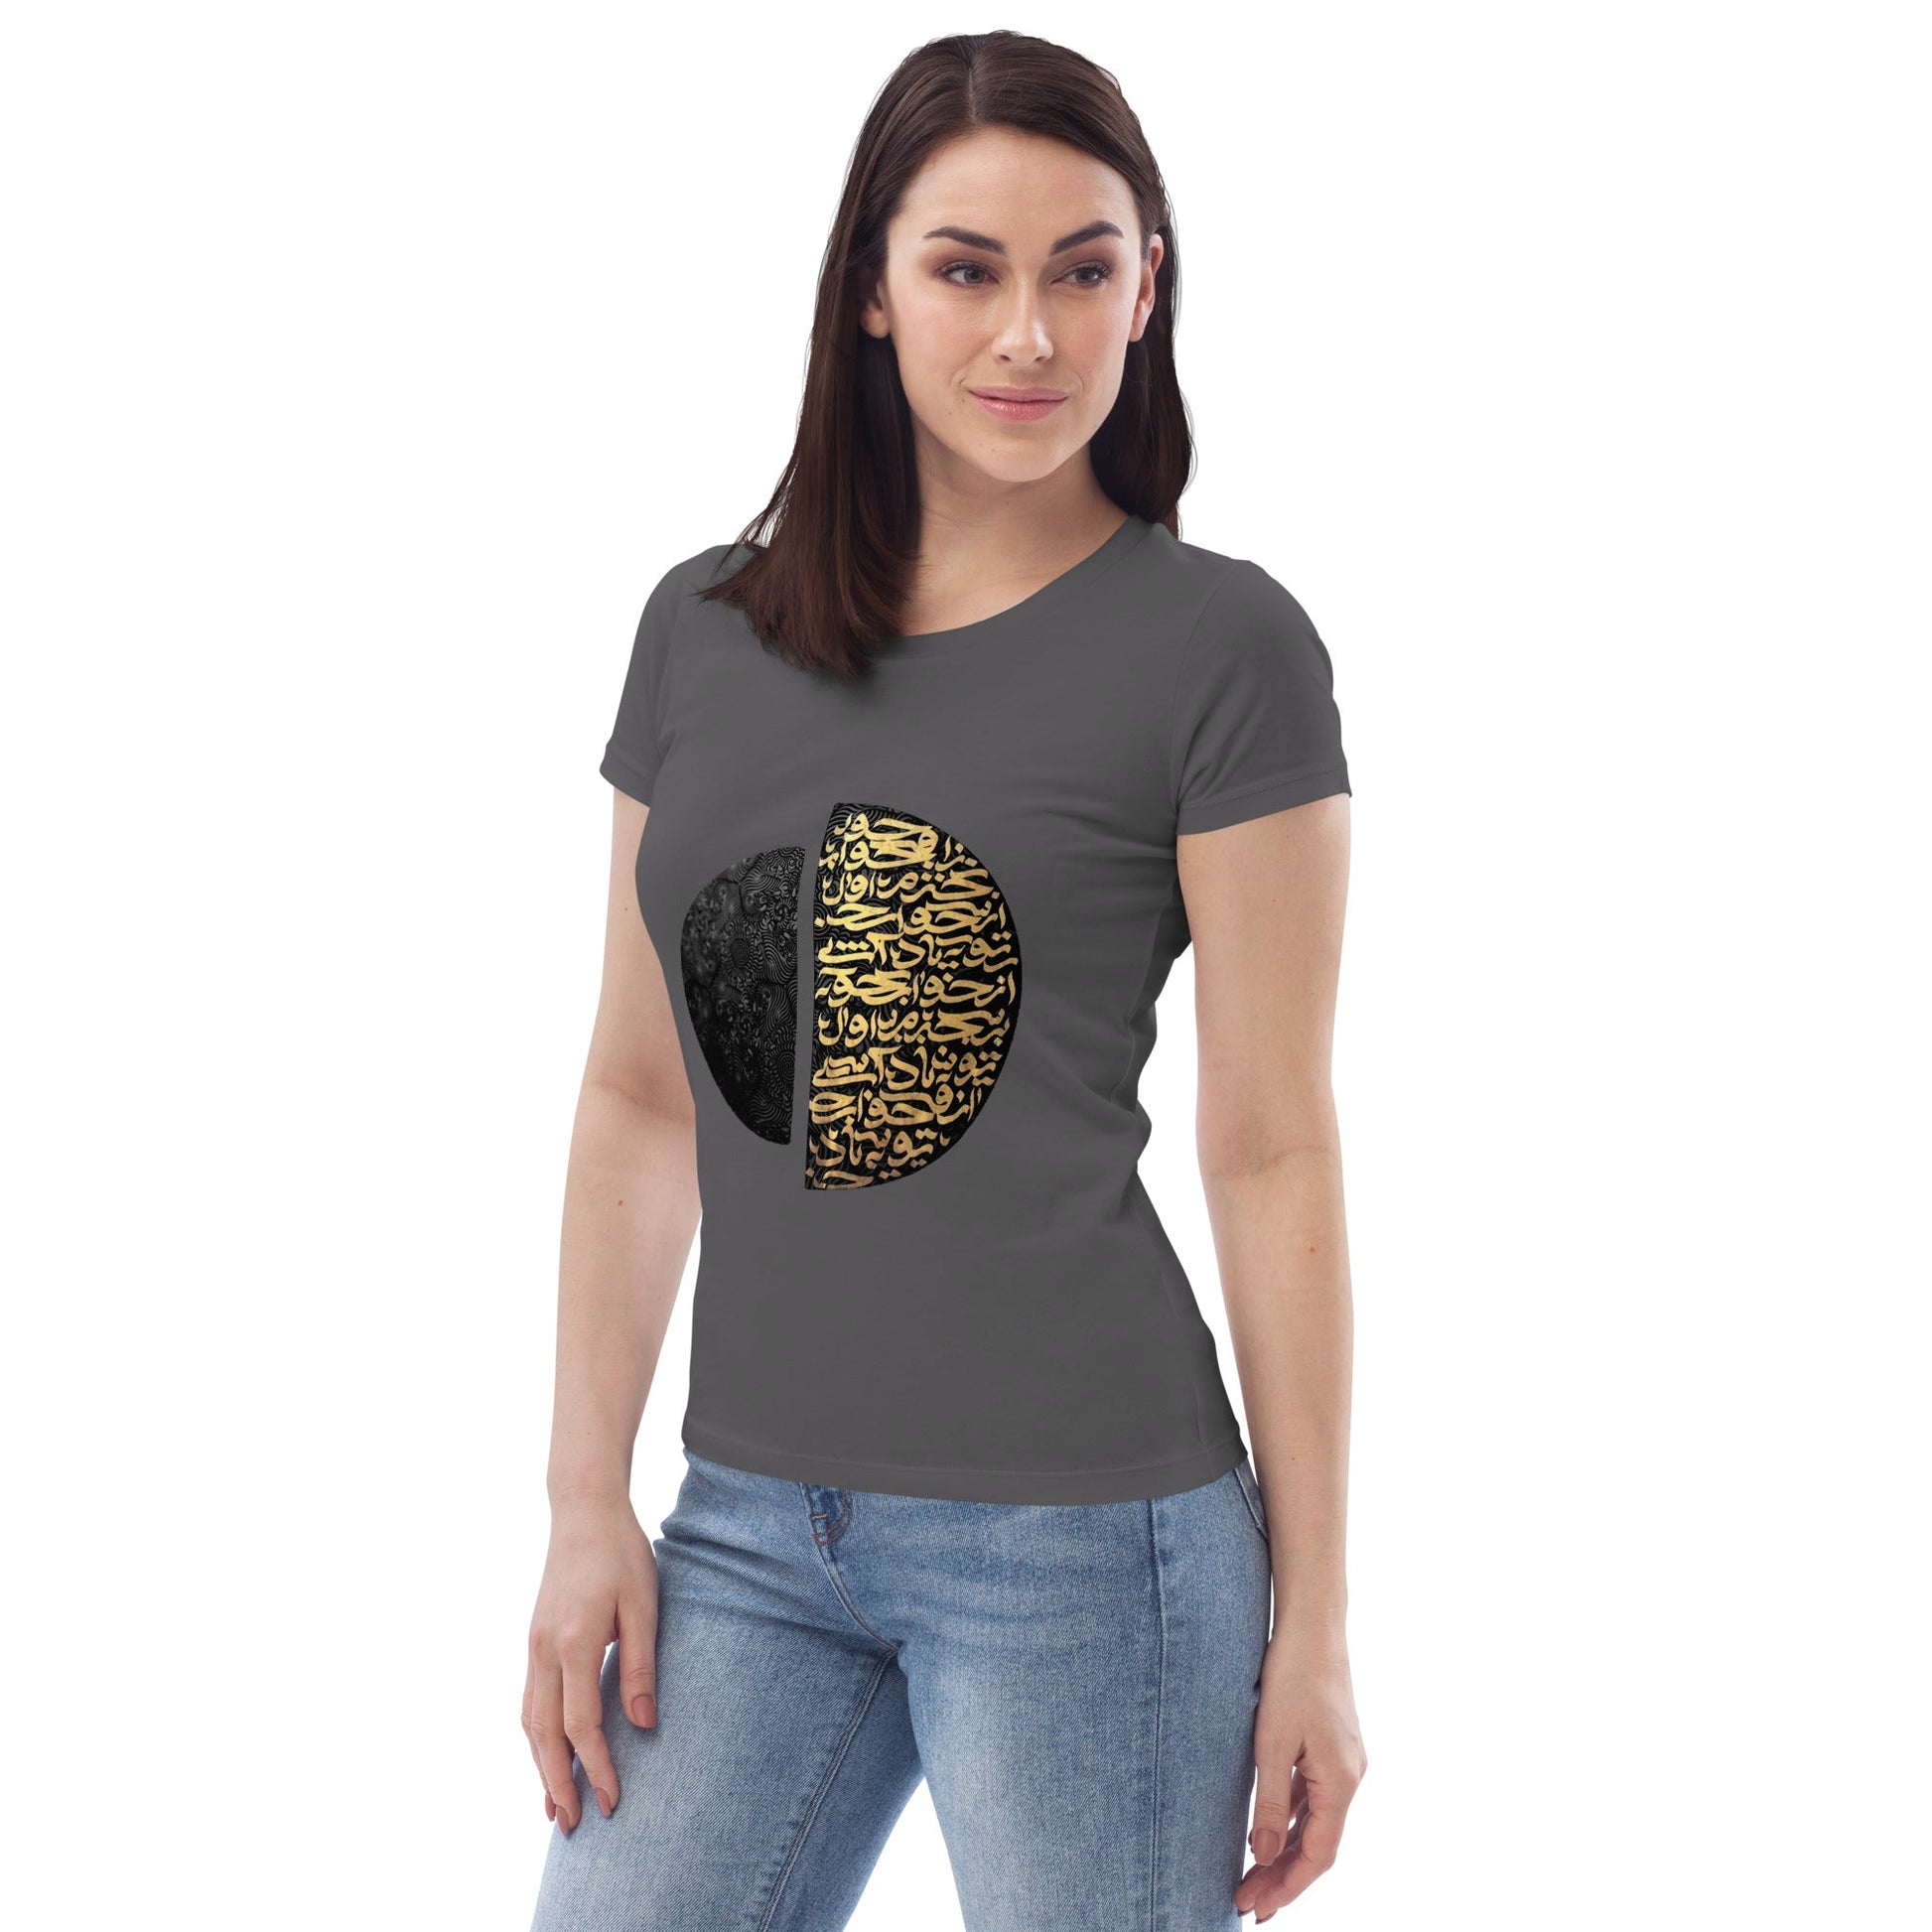 womens-eco-tshirt-golden-colligraphy-anthracite